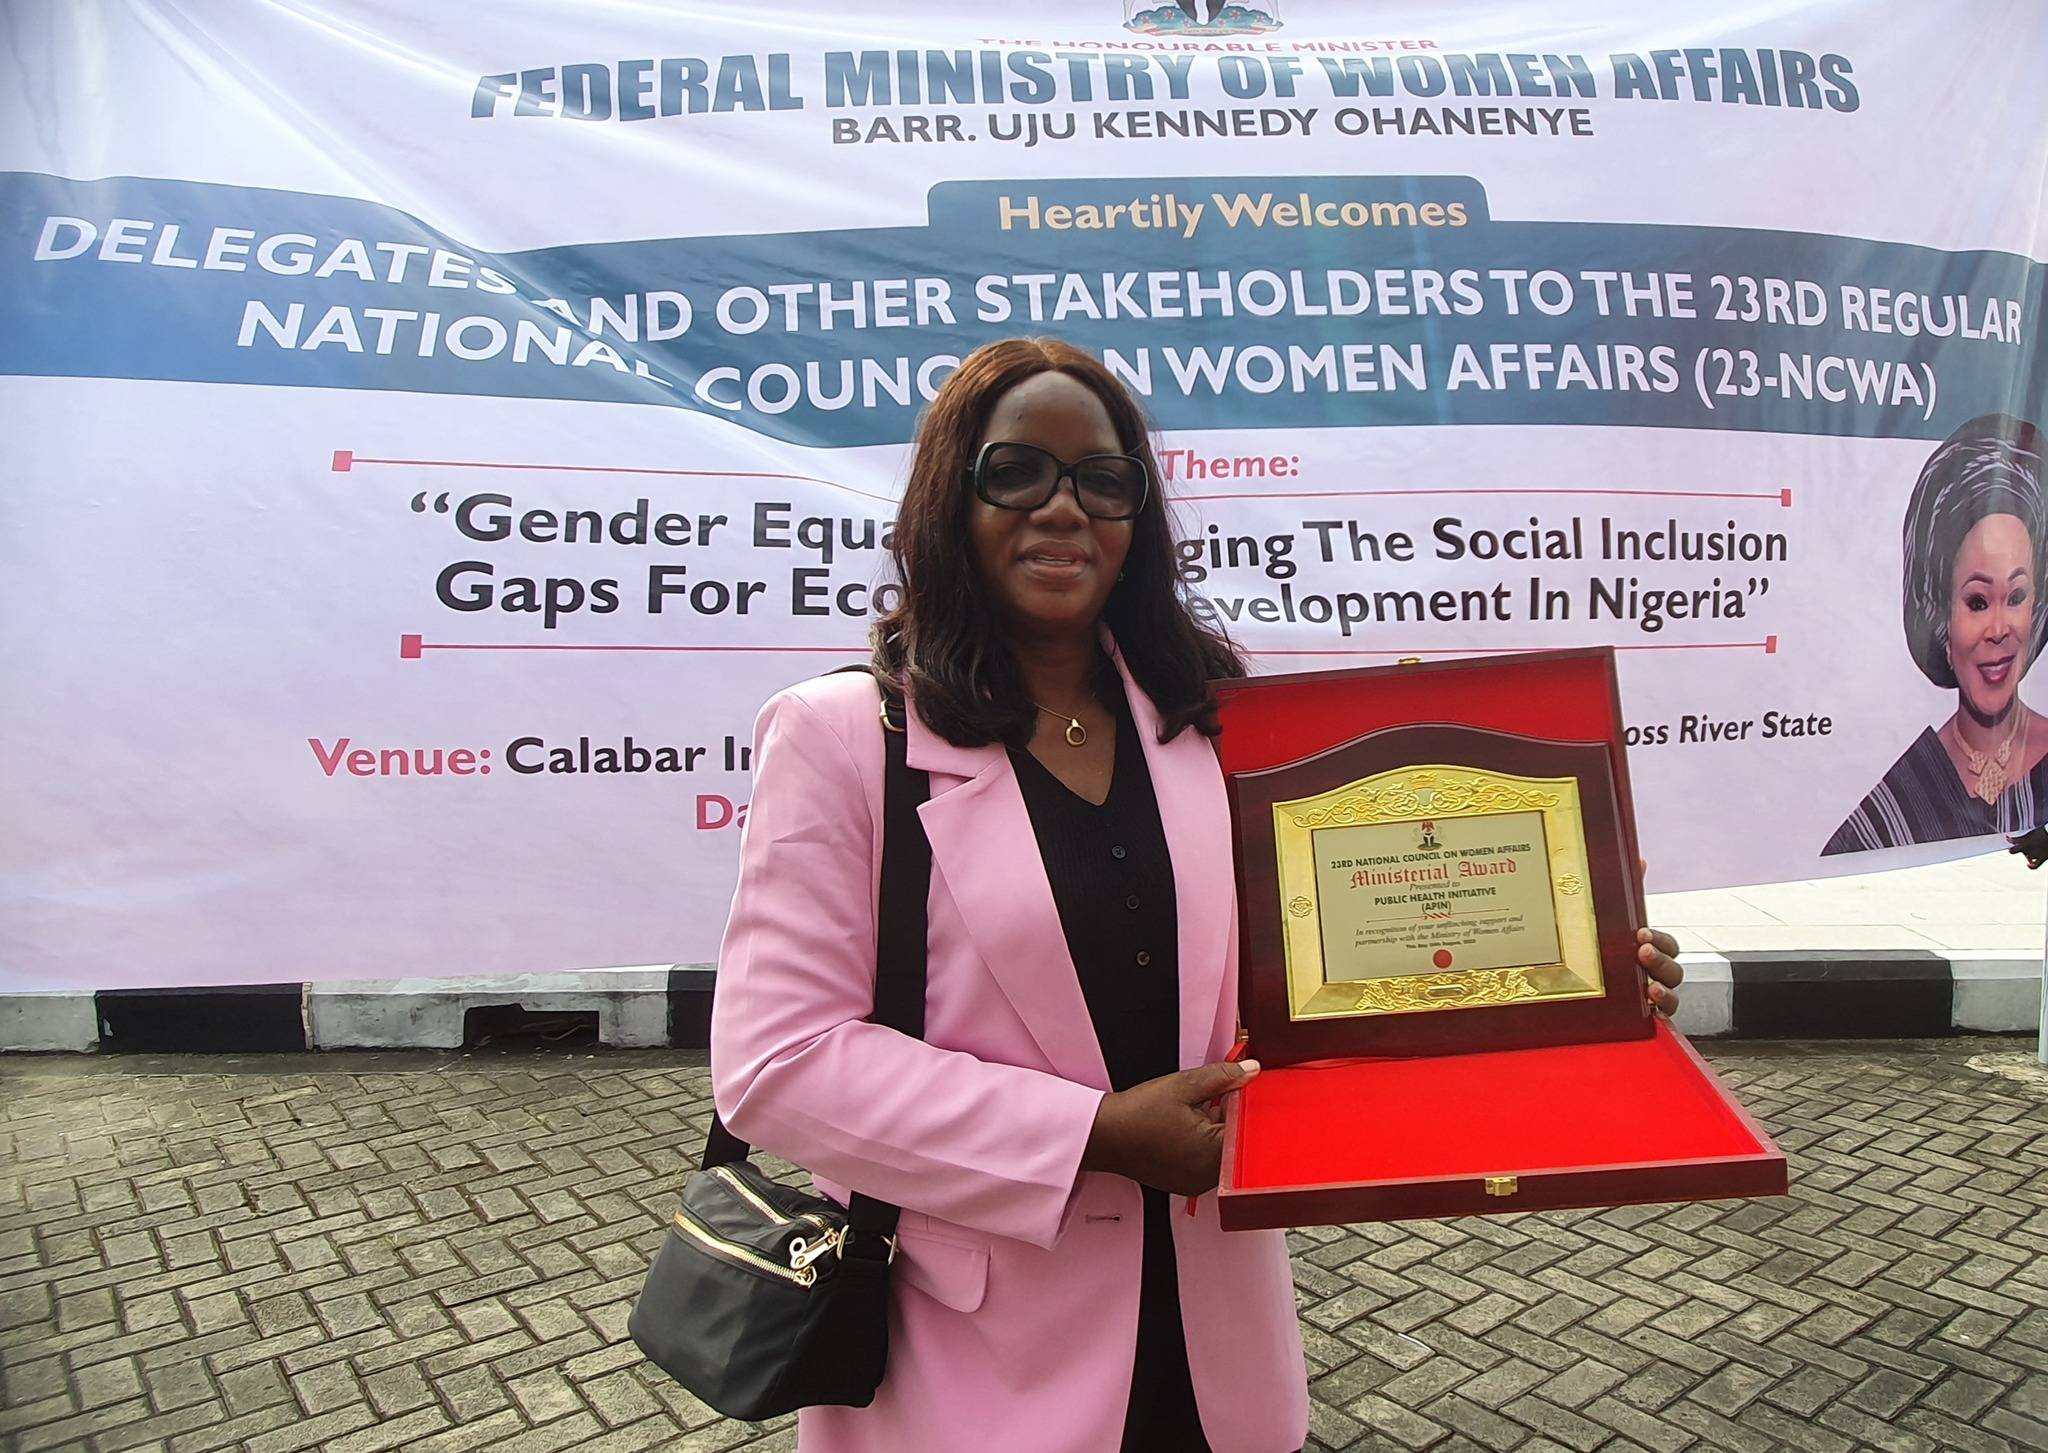 APIN Wins Ministerial Award From The Federal Ministry of Women Affairs!